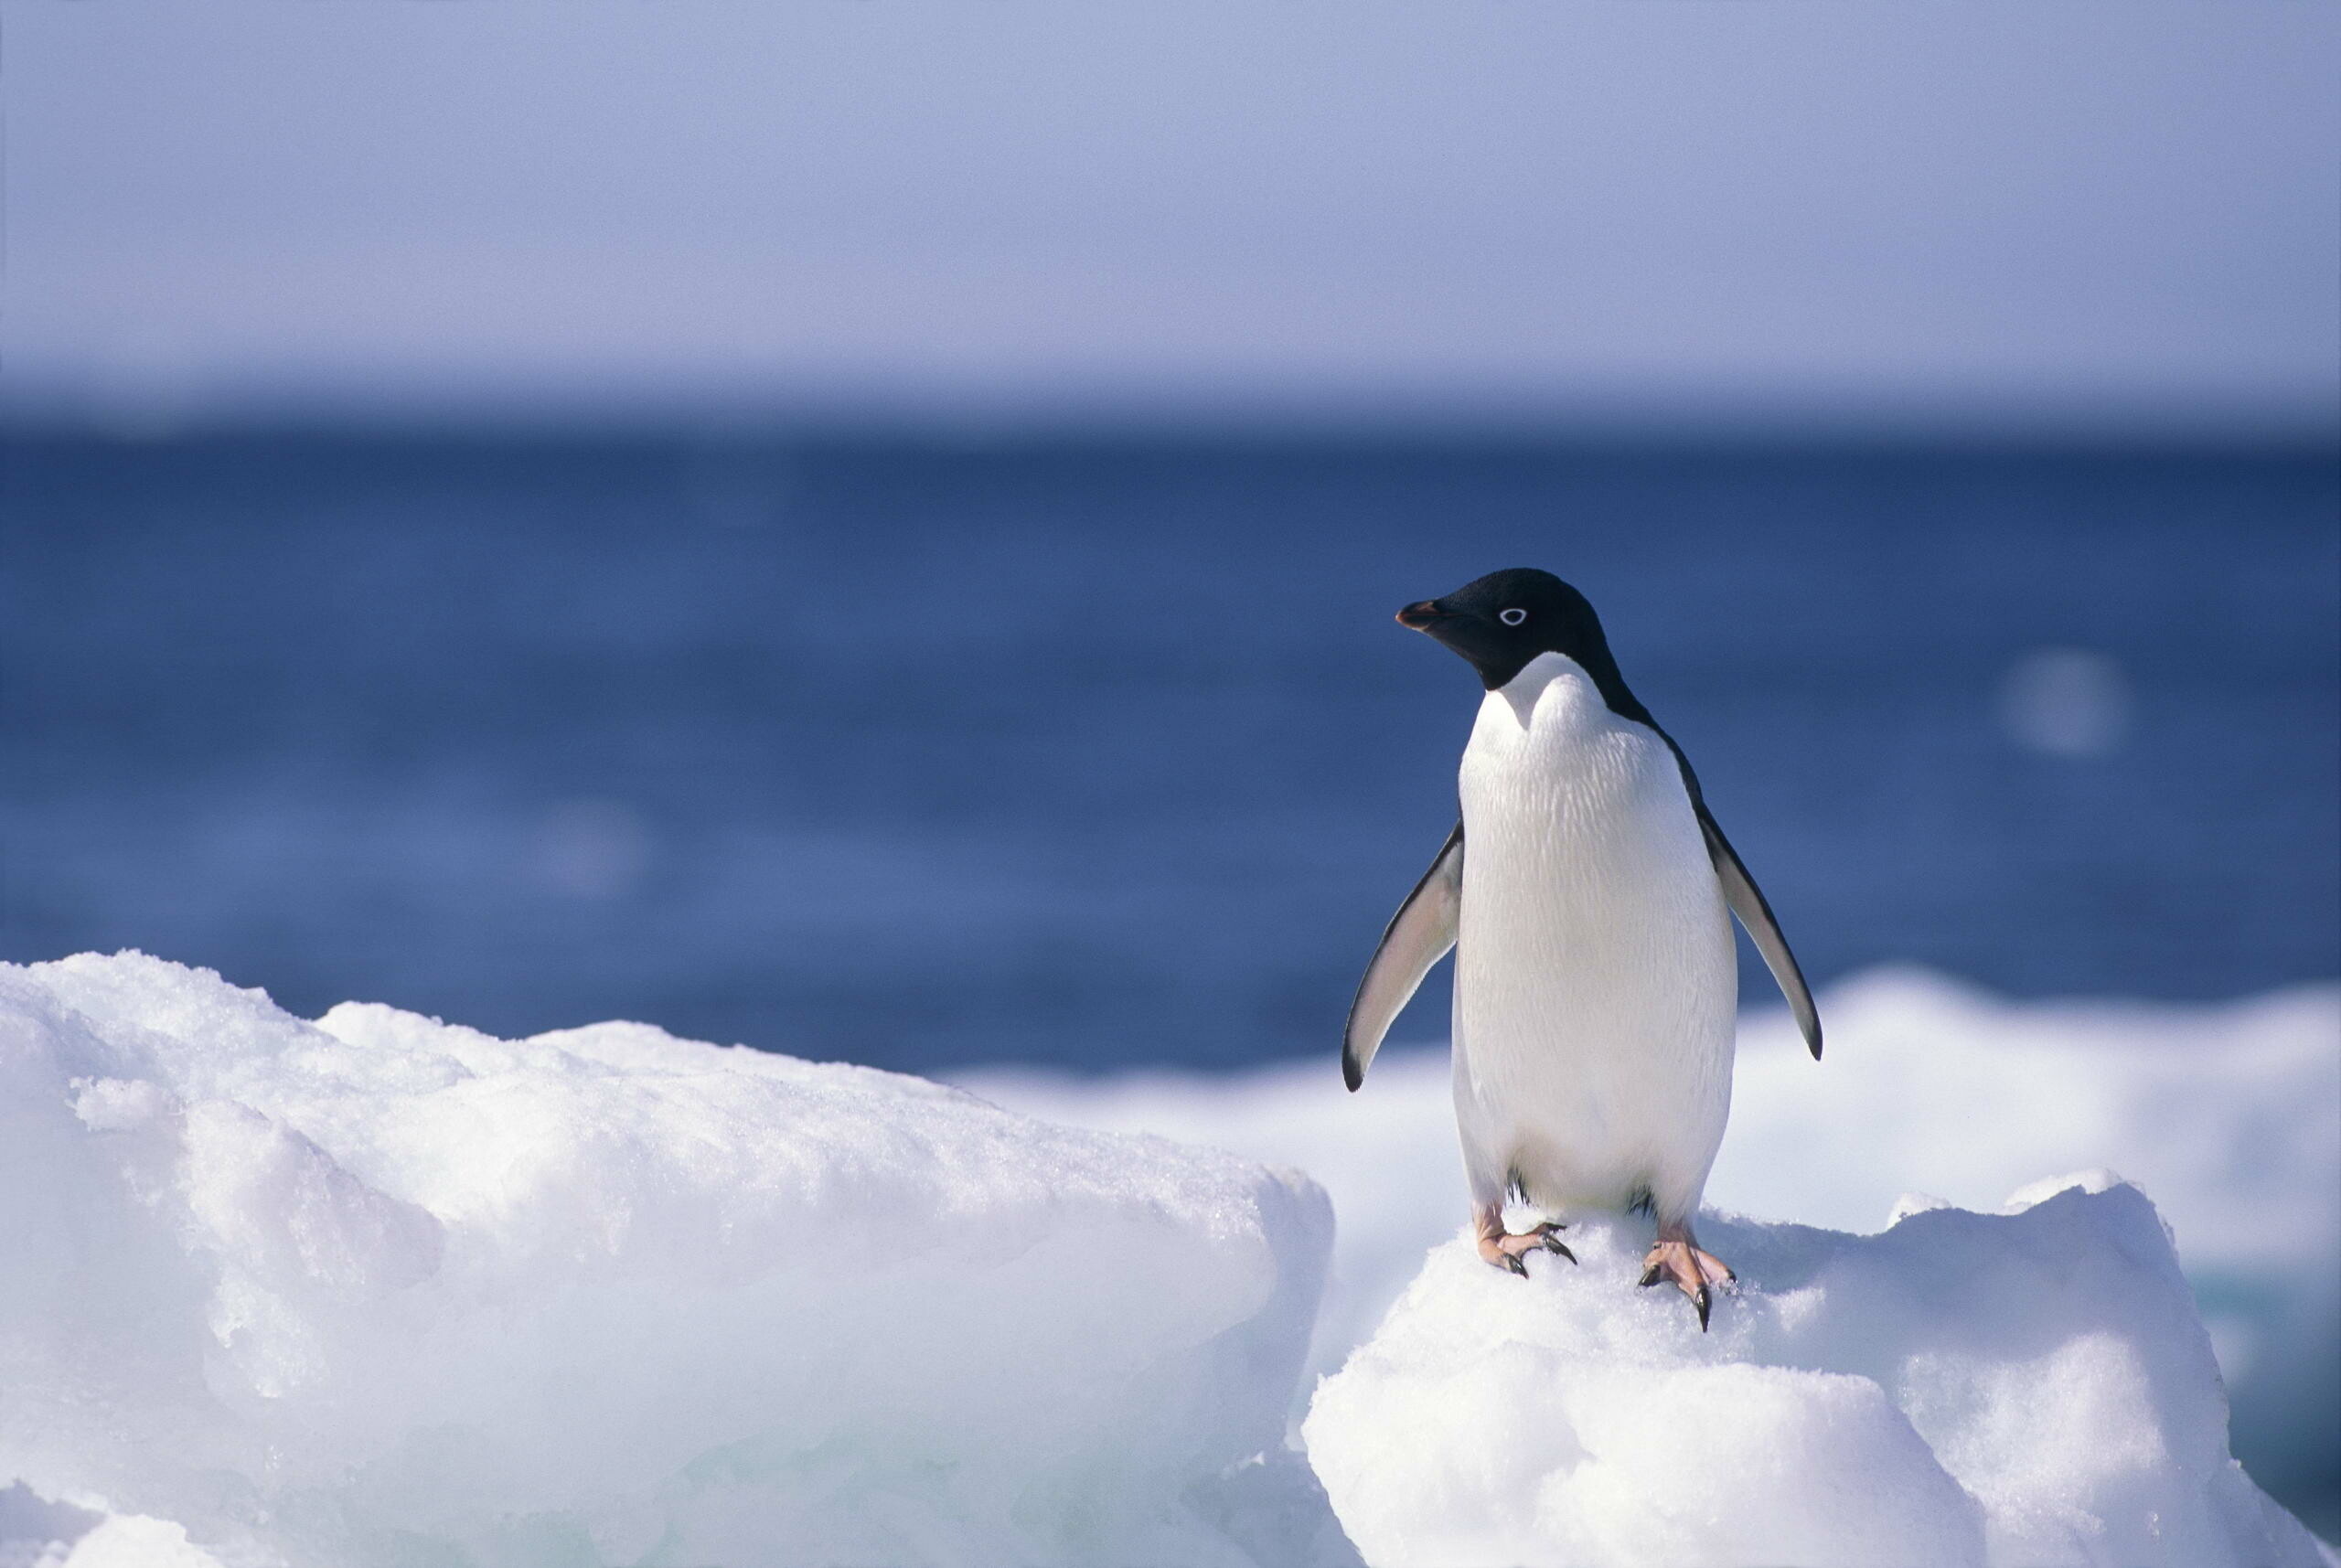 Baby penguin wallpapers, Cute and cuddly, HD and 4K images, Mobile charm, 2560x1720 HD Desktop